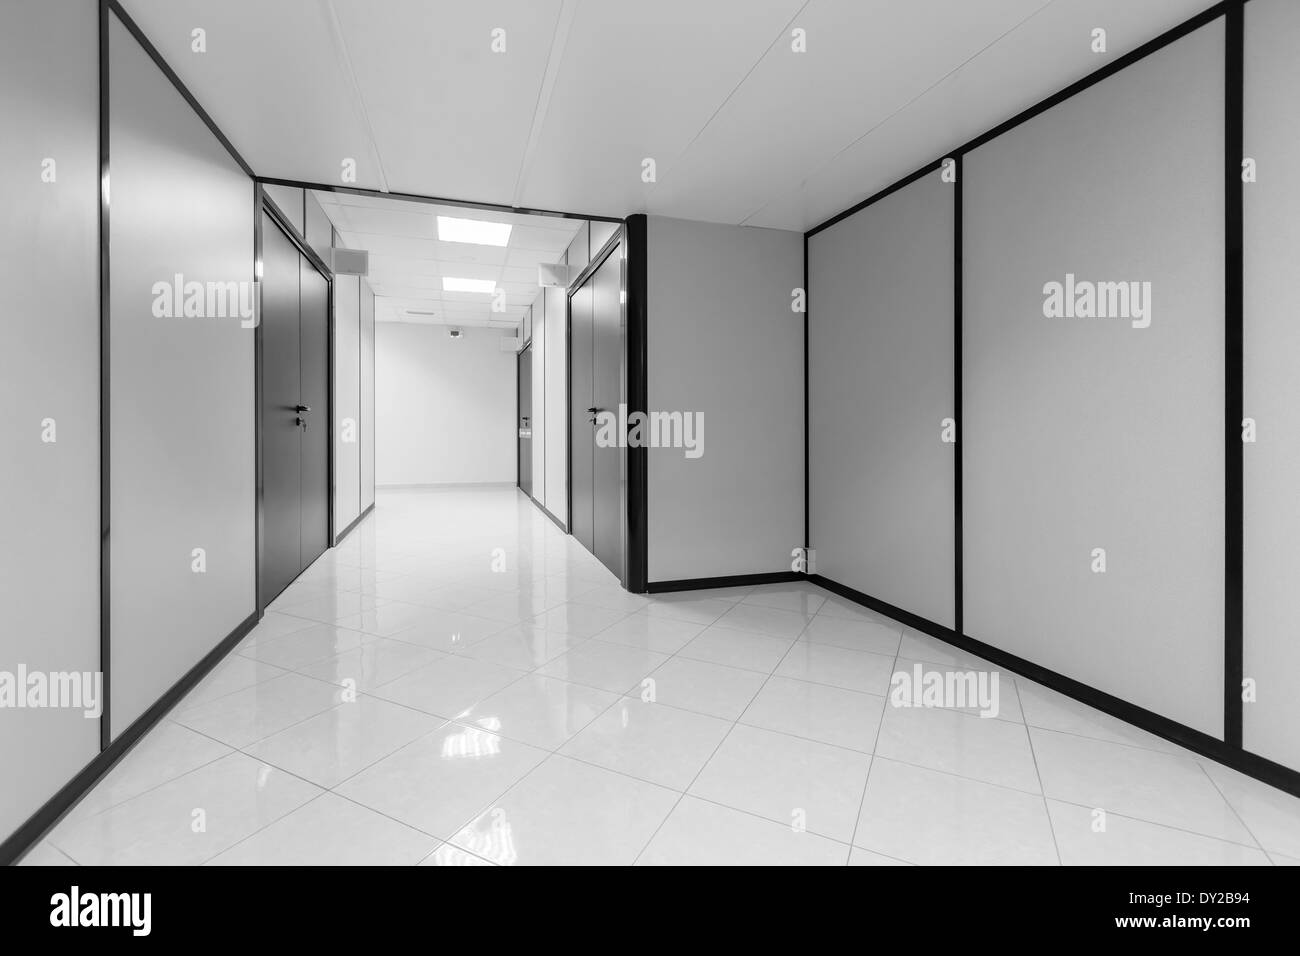 Abstract empty office interior with white walls and black decor Stock Photo